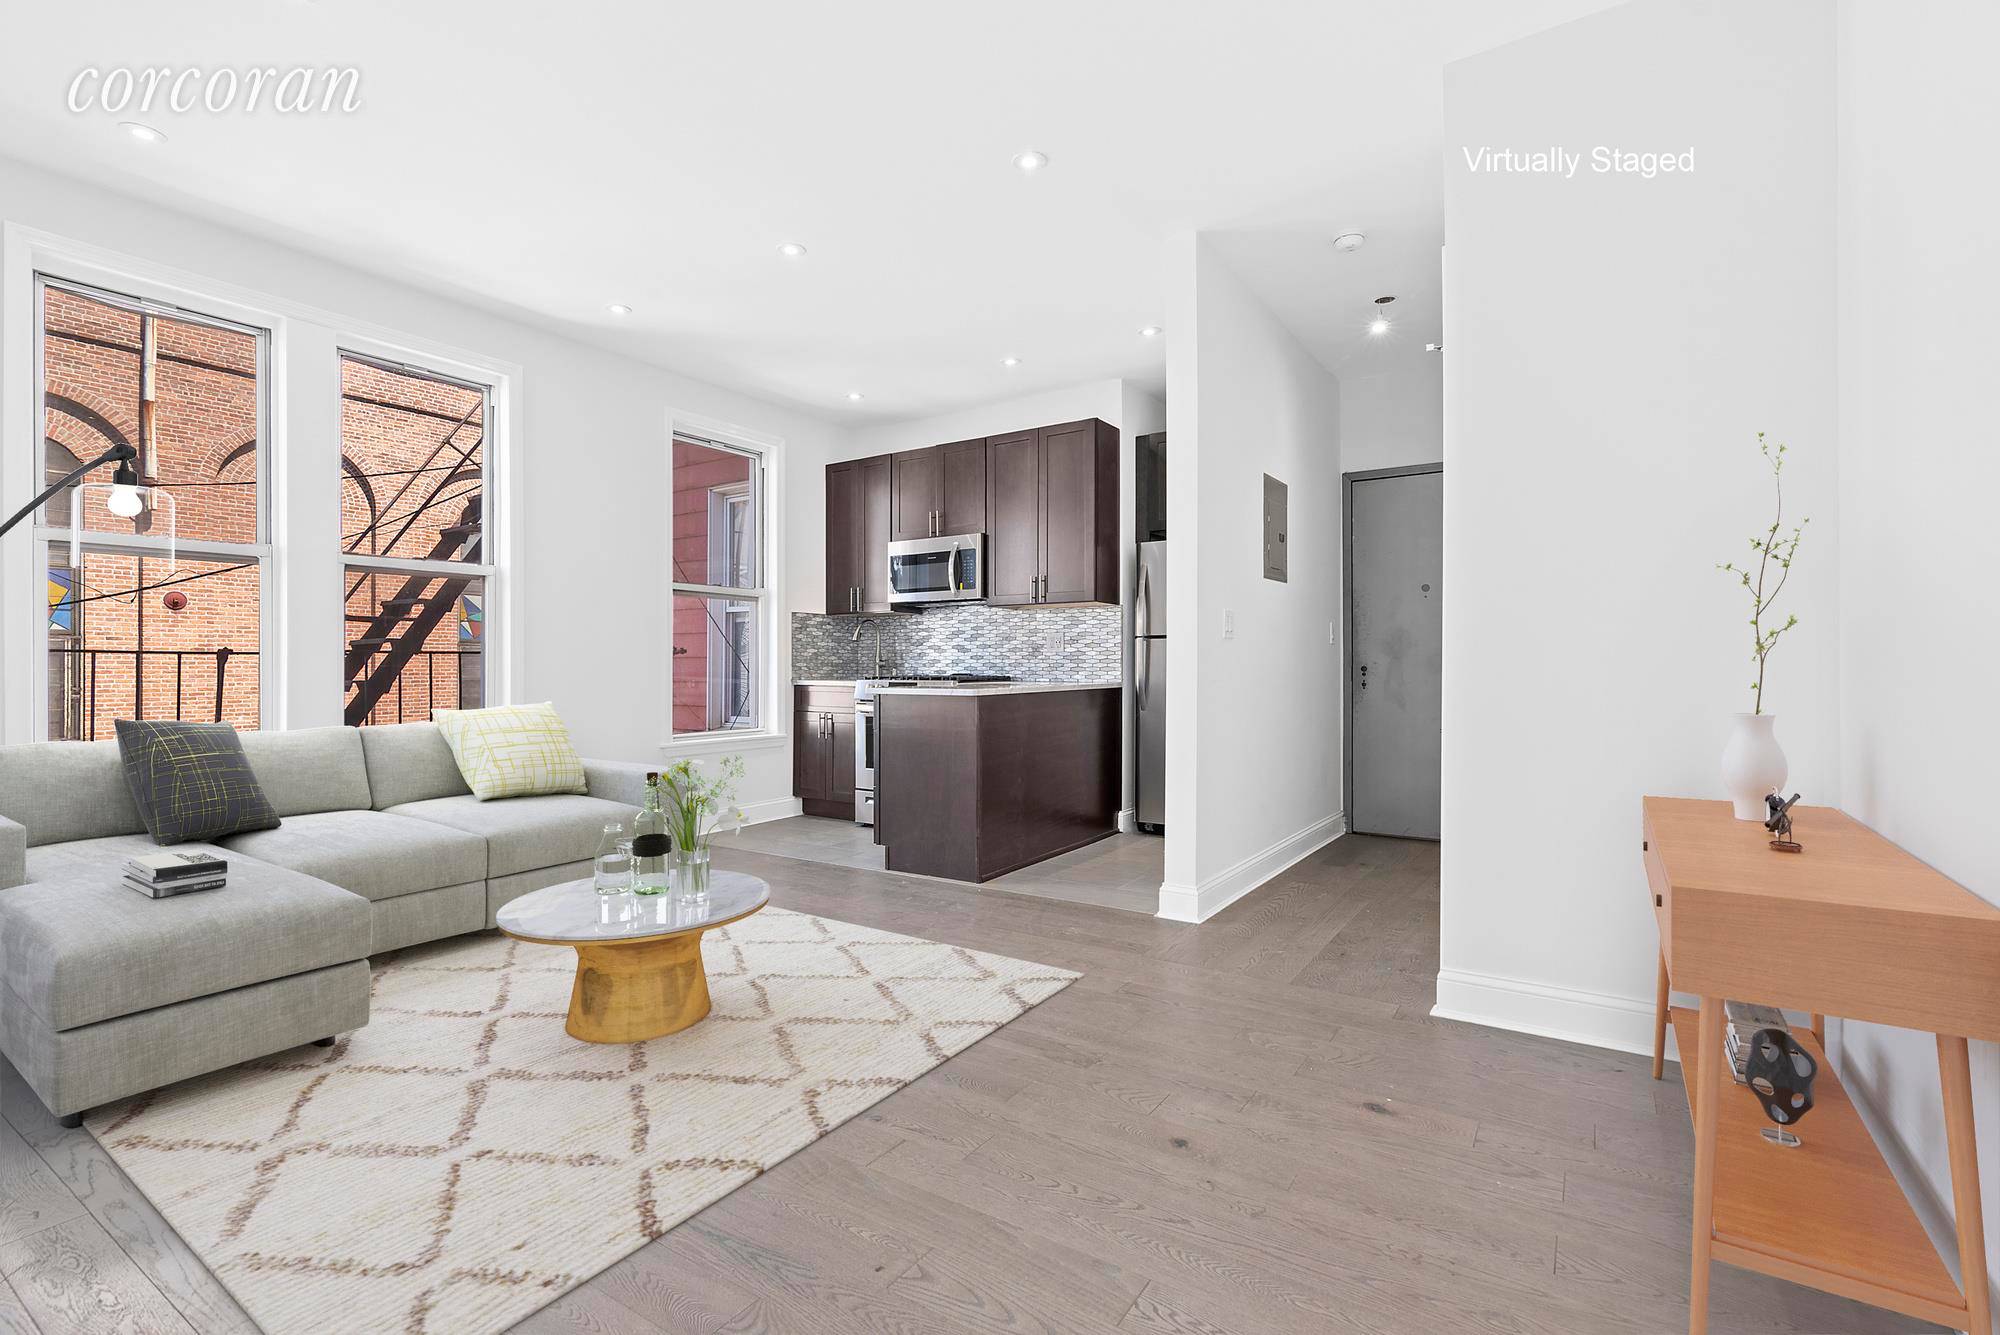 Sunny and New ! Be the first to live in this TRUE 2 bedroom home at 151 Leonard Street in Williamsburg.